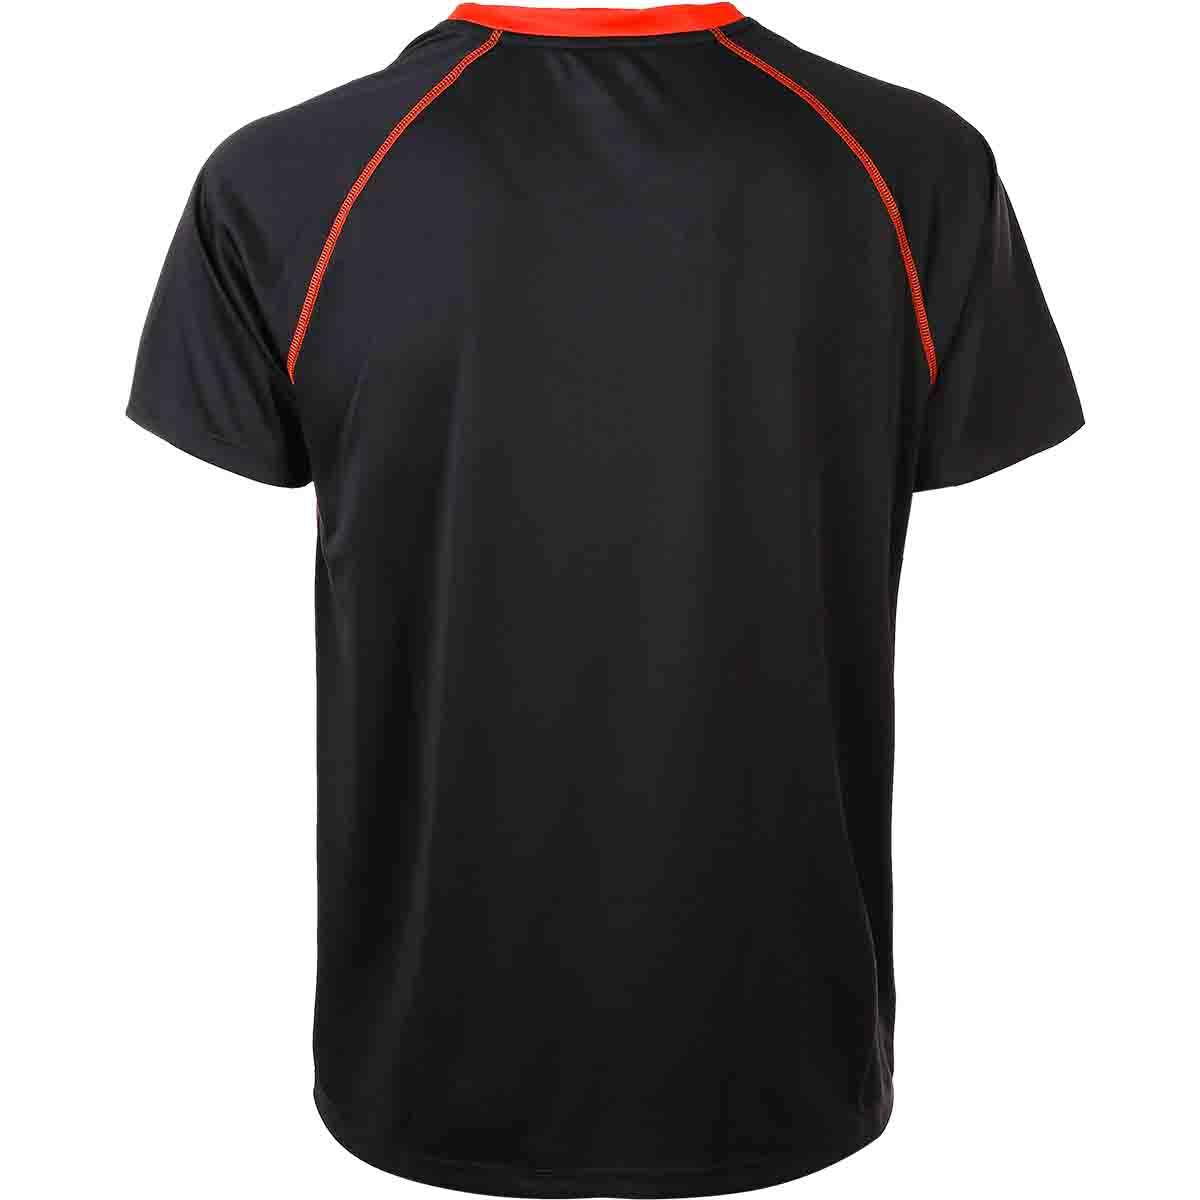 FZ Forza Monthy Junior Badminton T-Shirt - 4009 Chinese Red